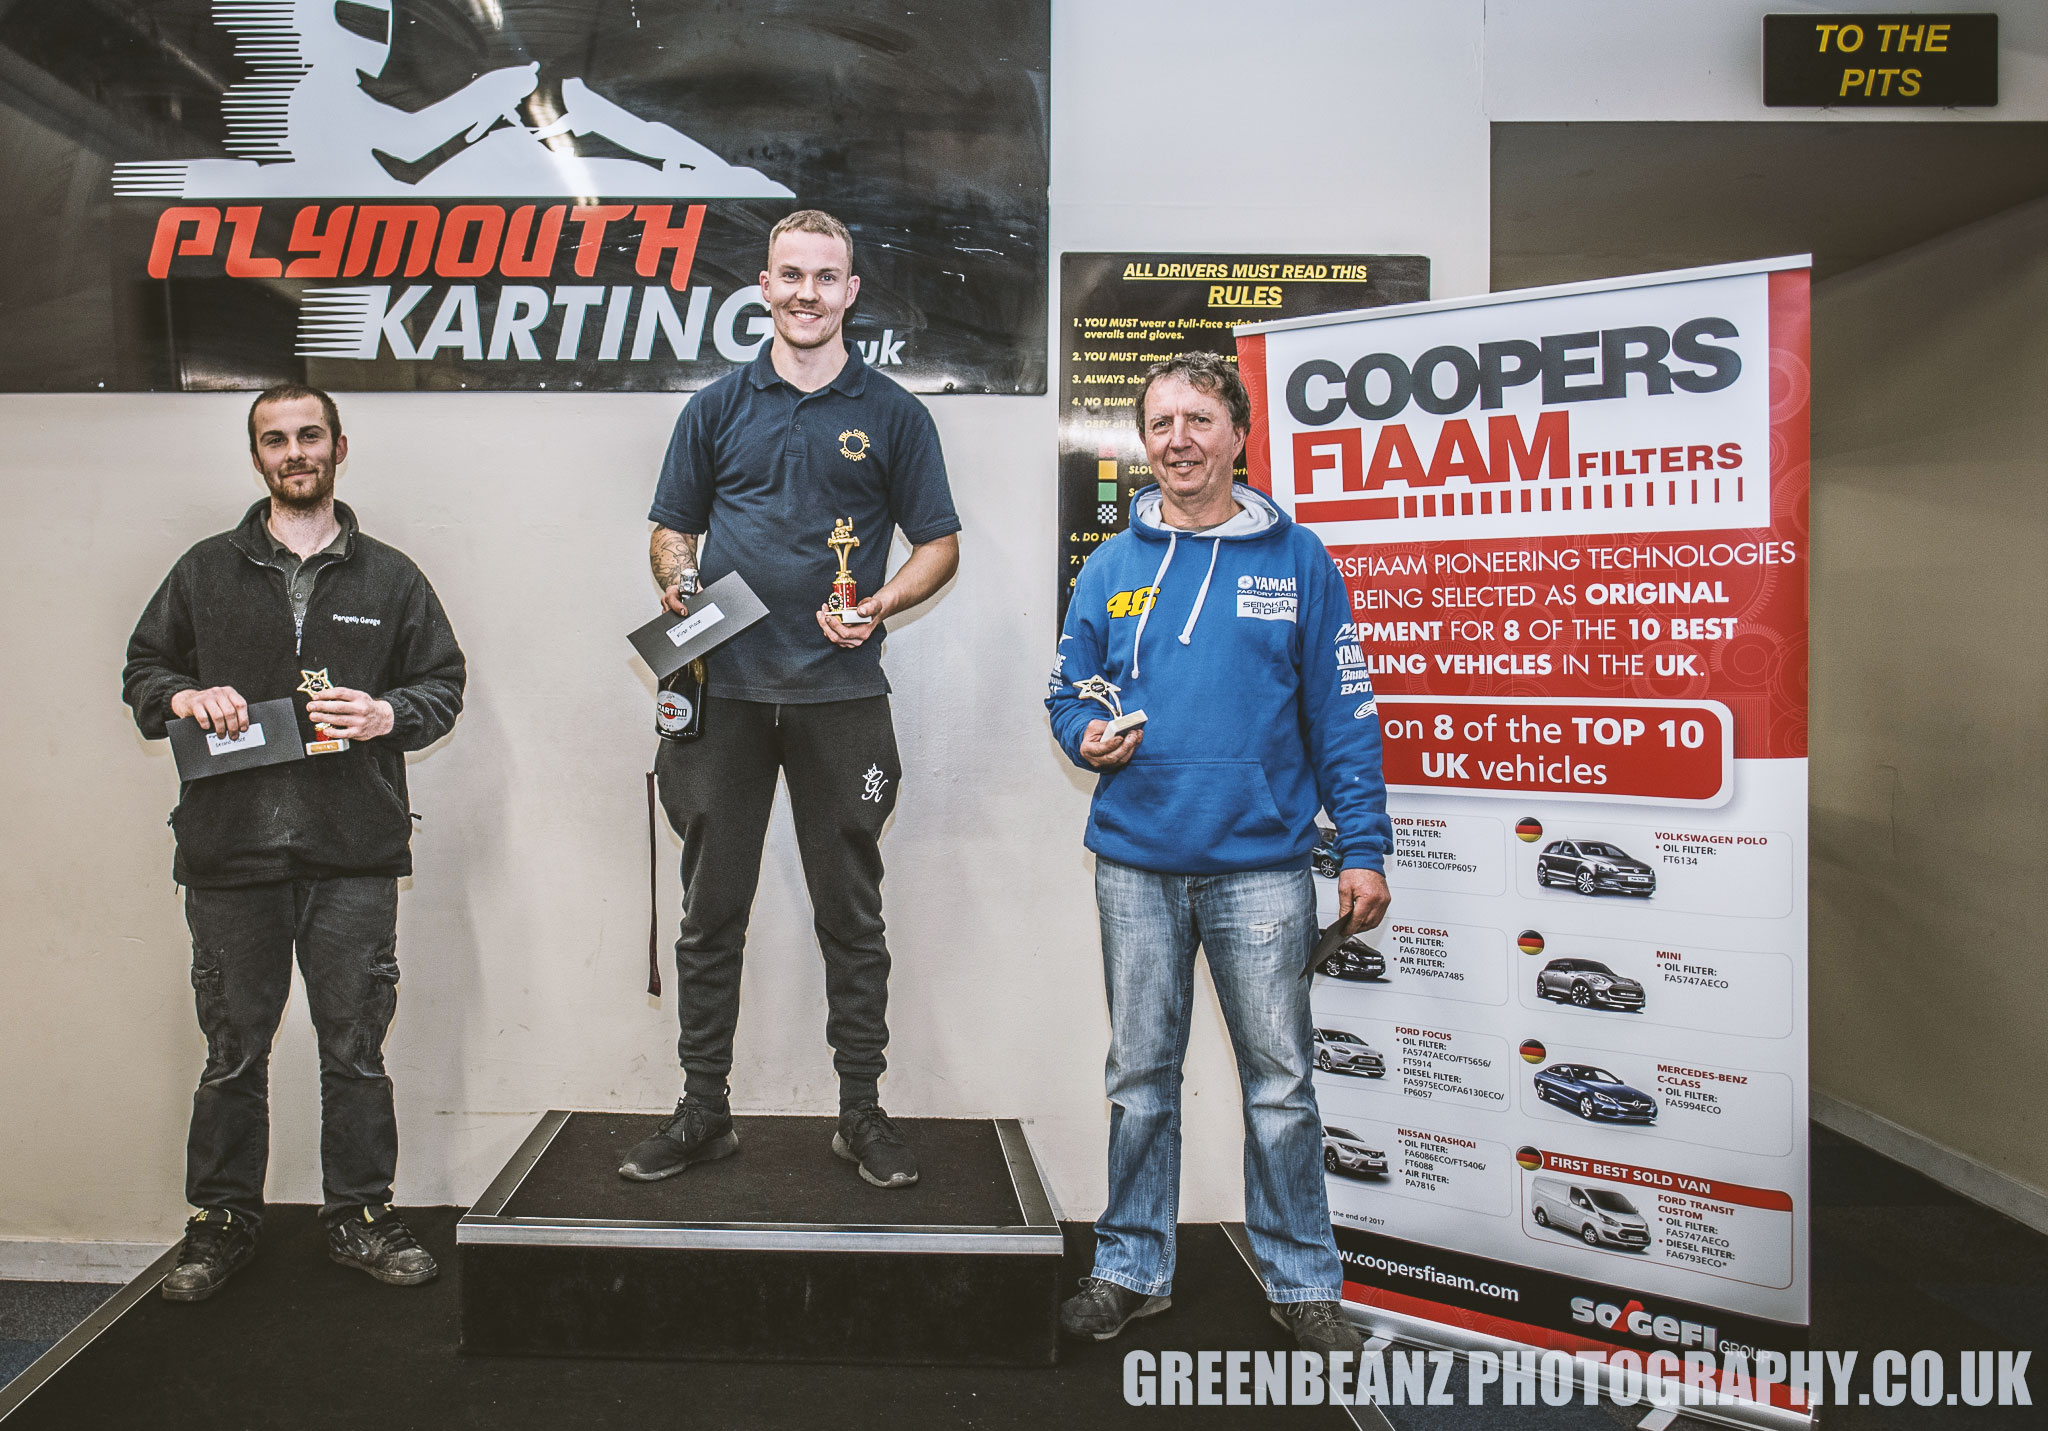 The Winners Podium at at teh Coopers Fiaam Plymouth Karting event